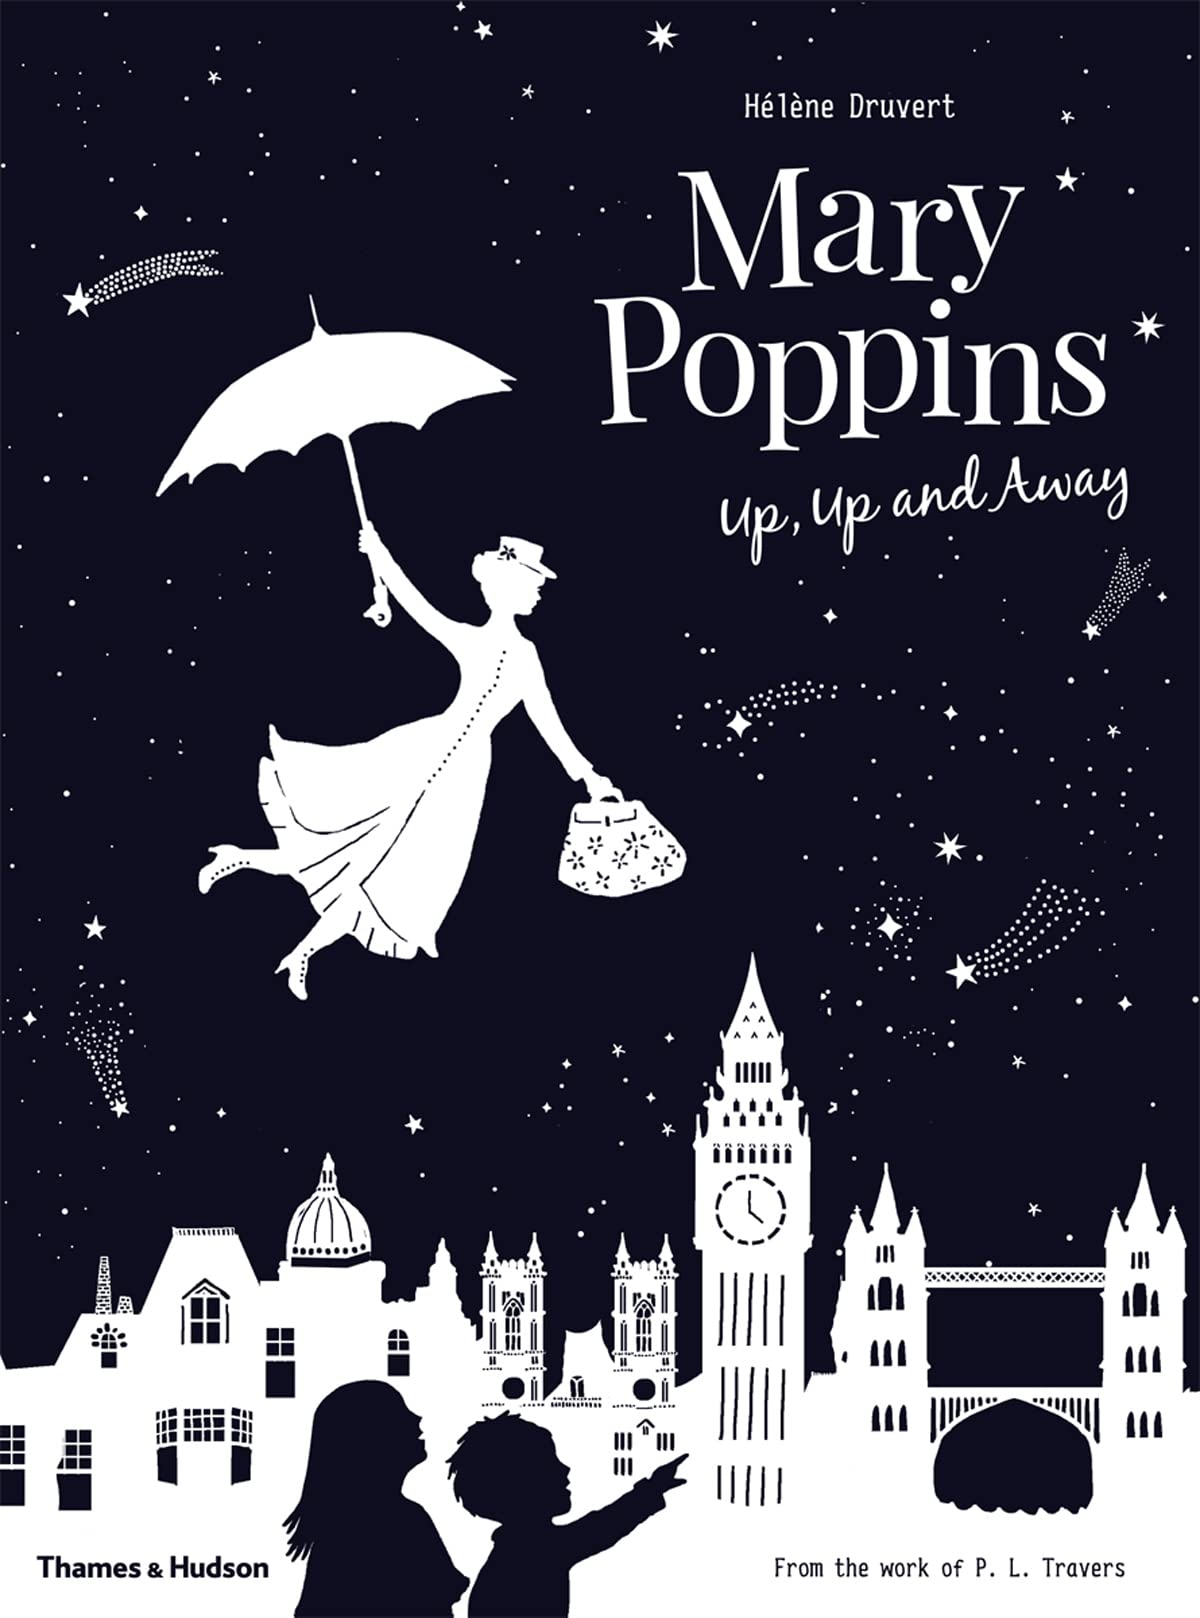 MARY POPPINS UP UP AWAY